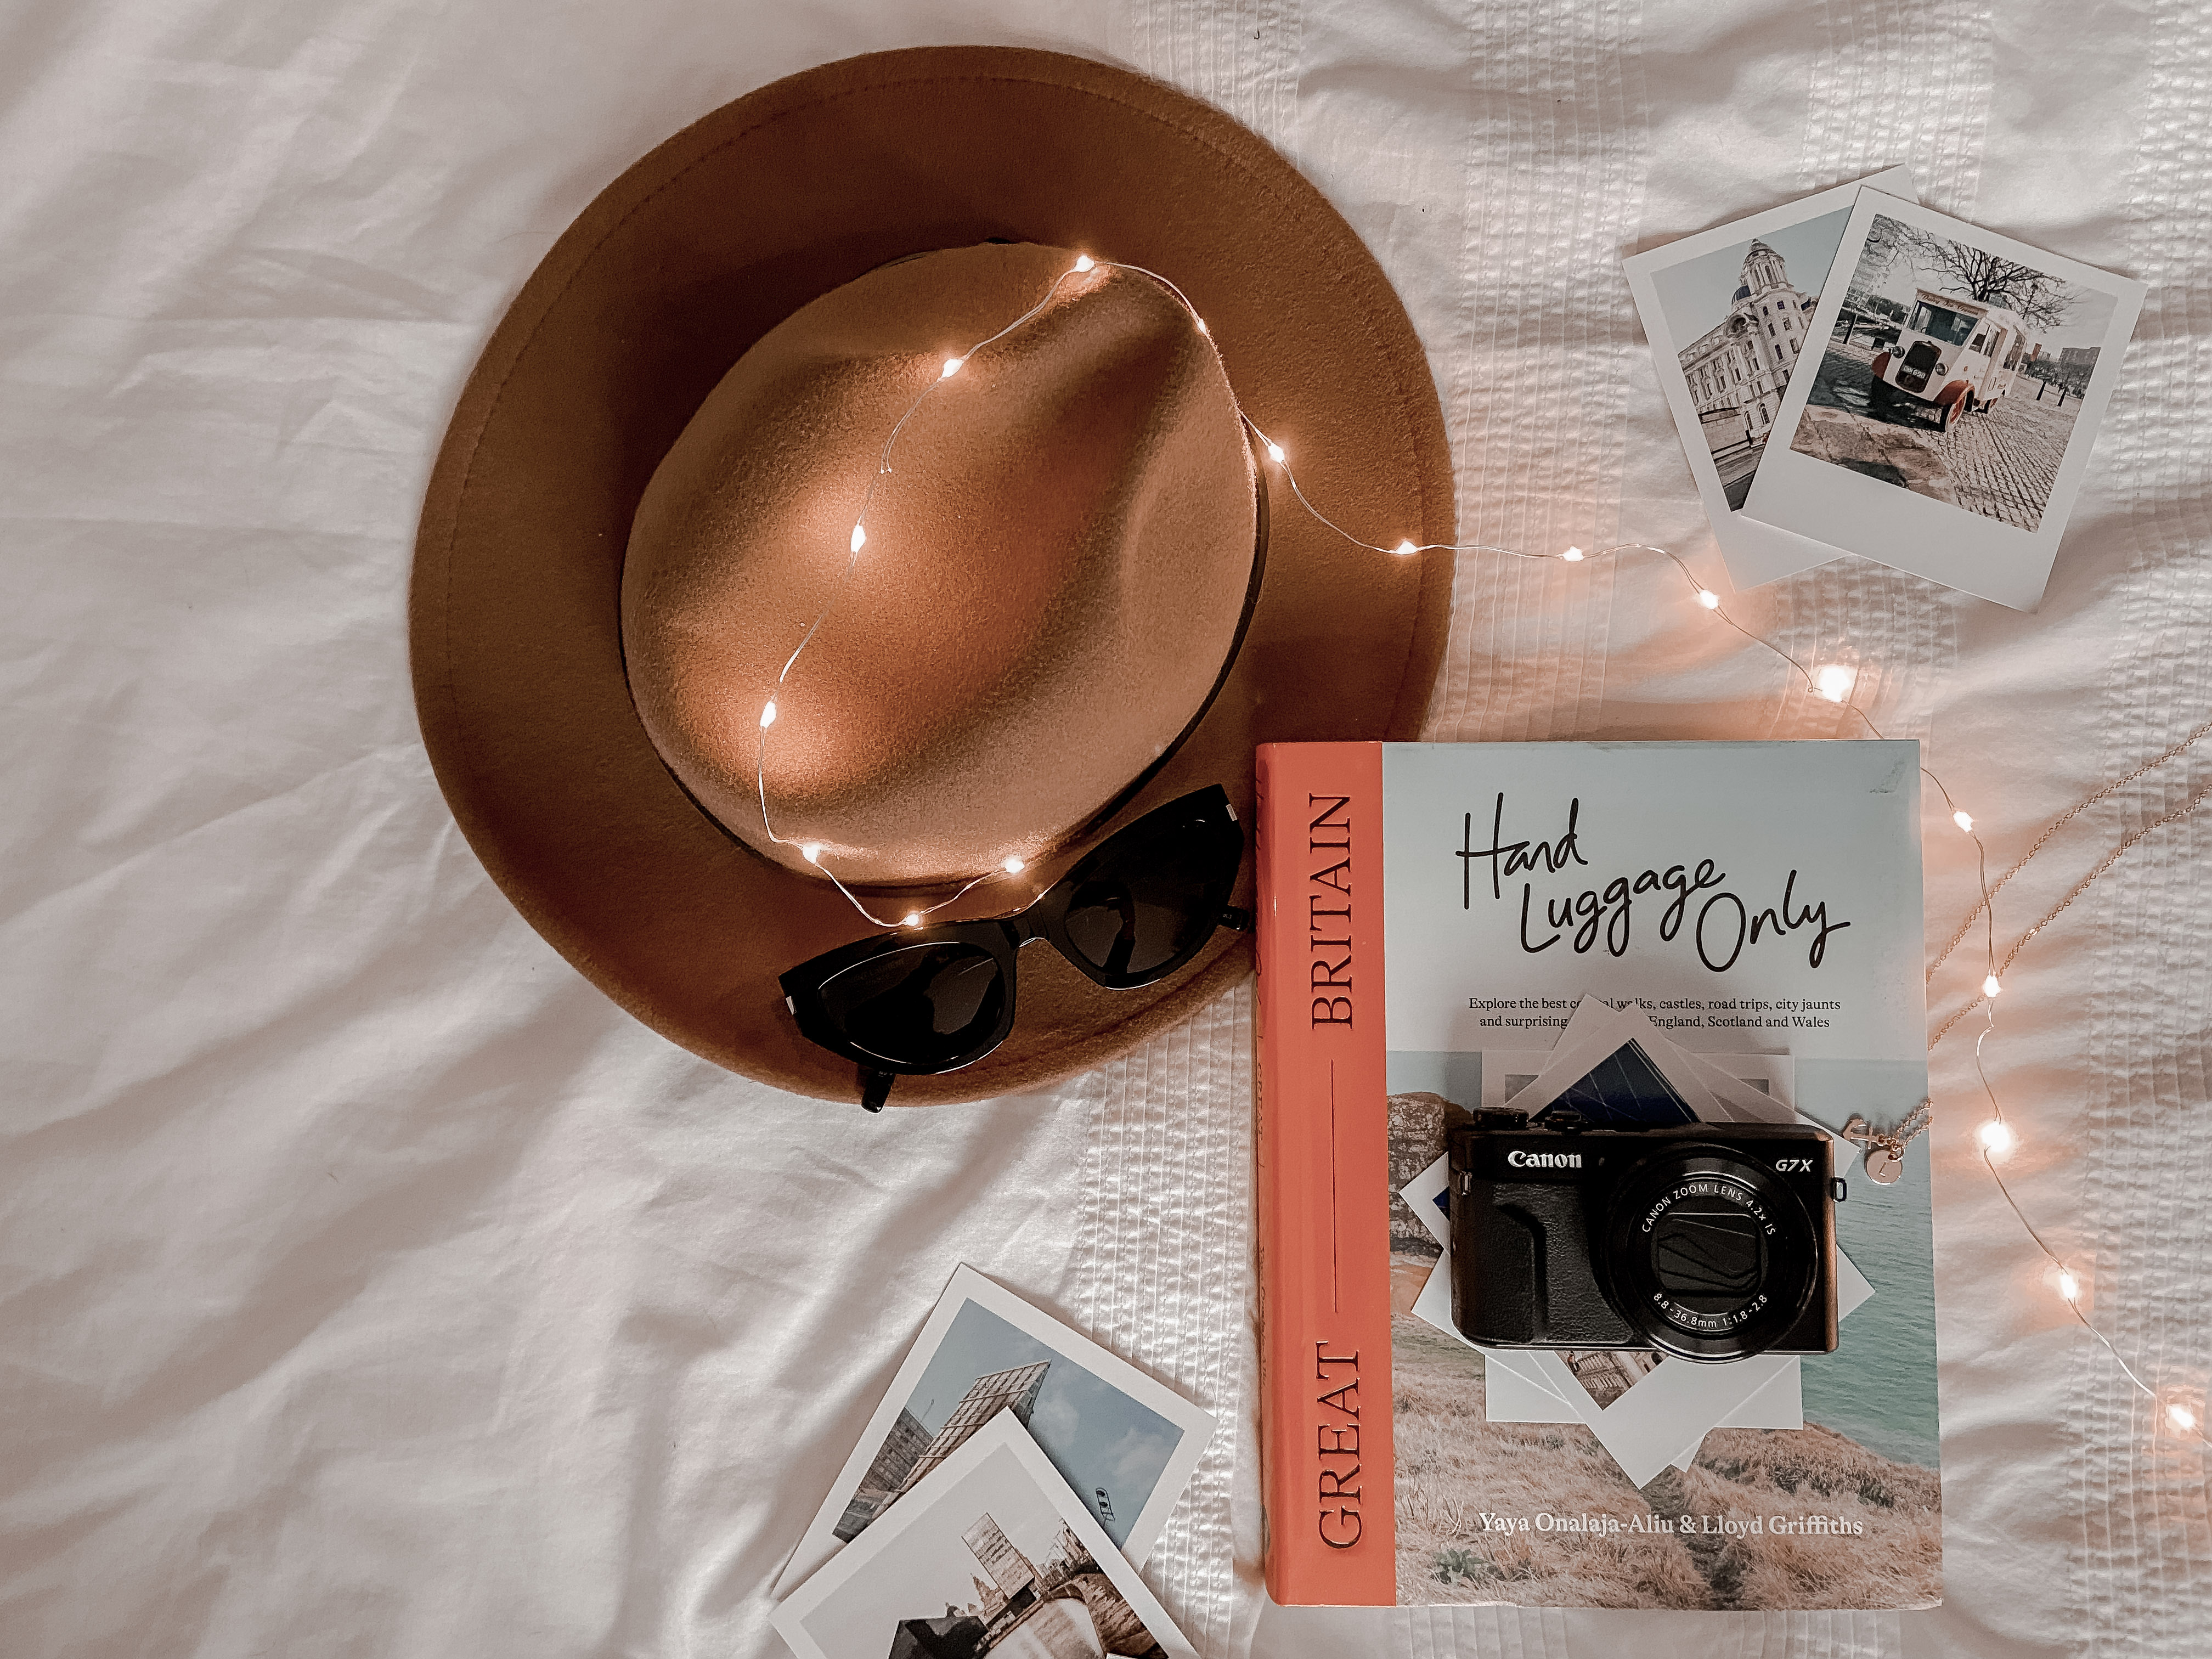 A flatlay of a brown fedora hat and travel book.